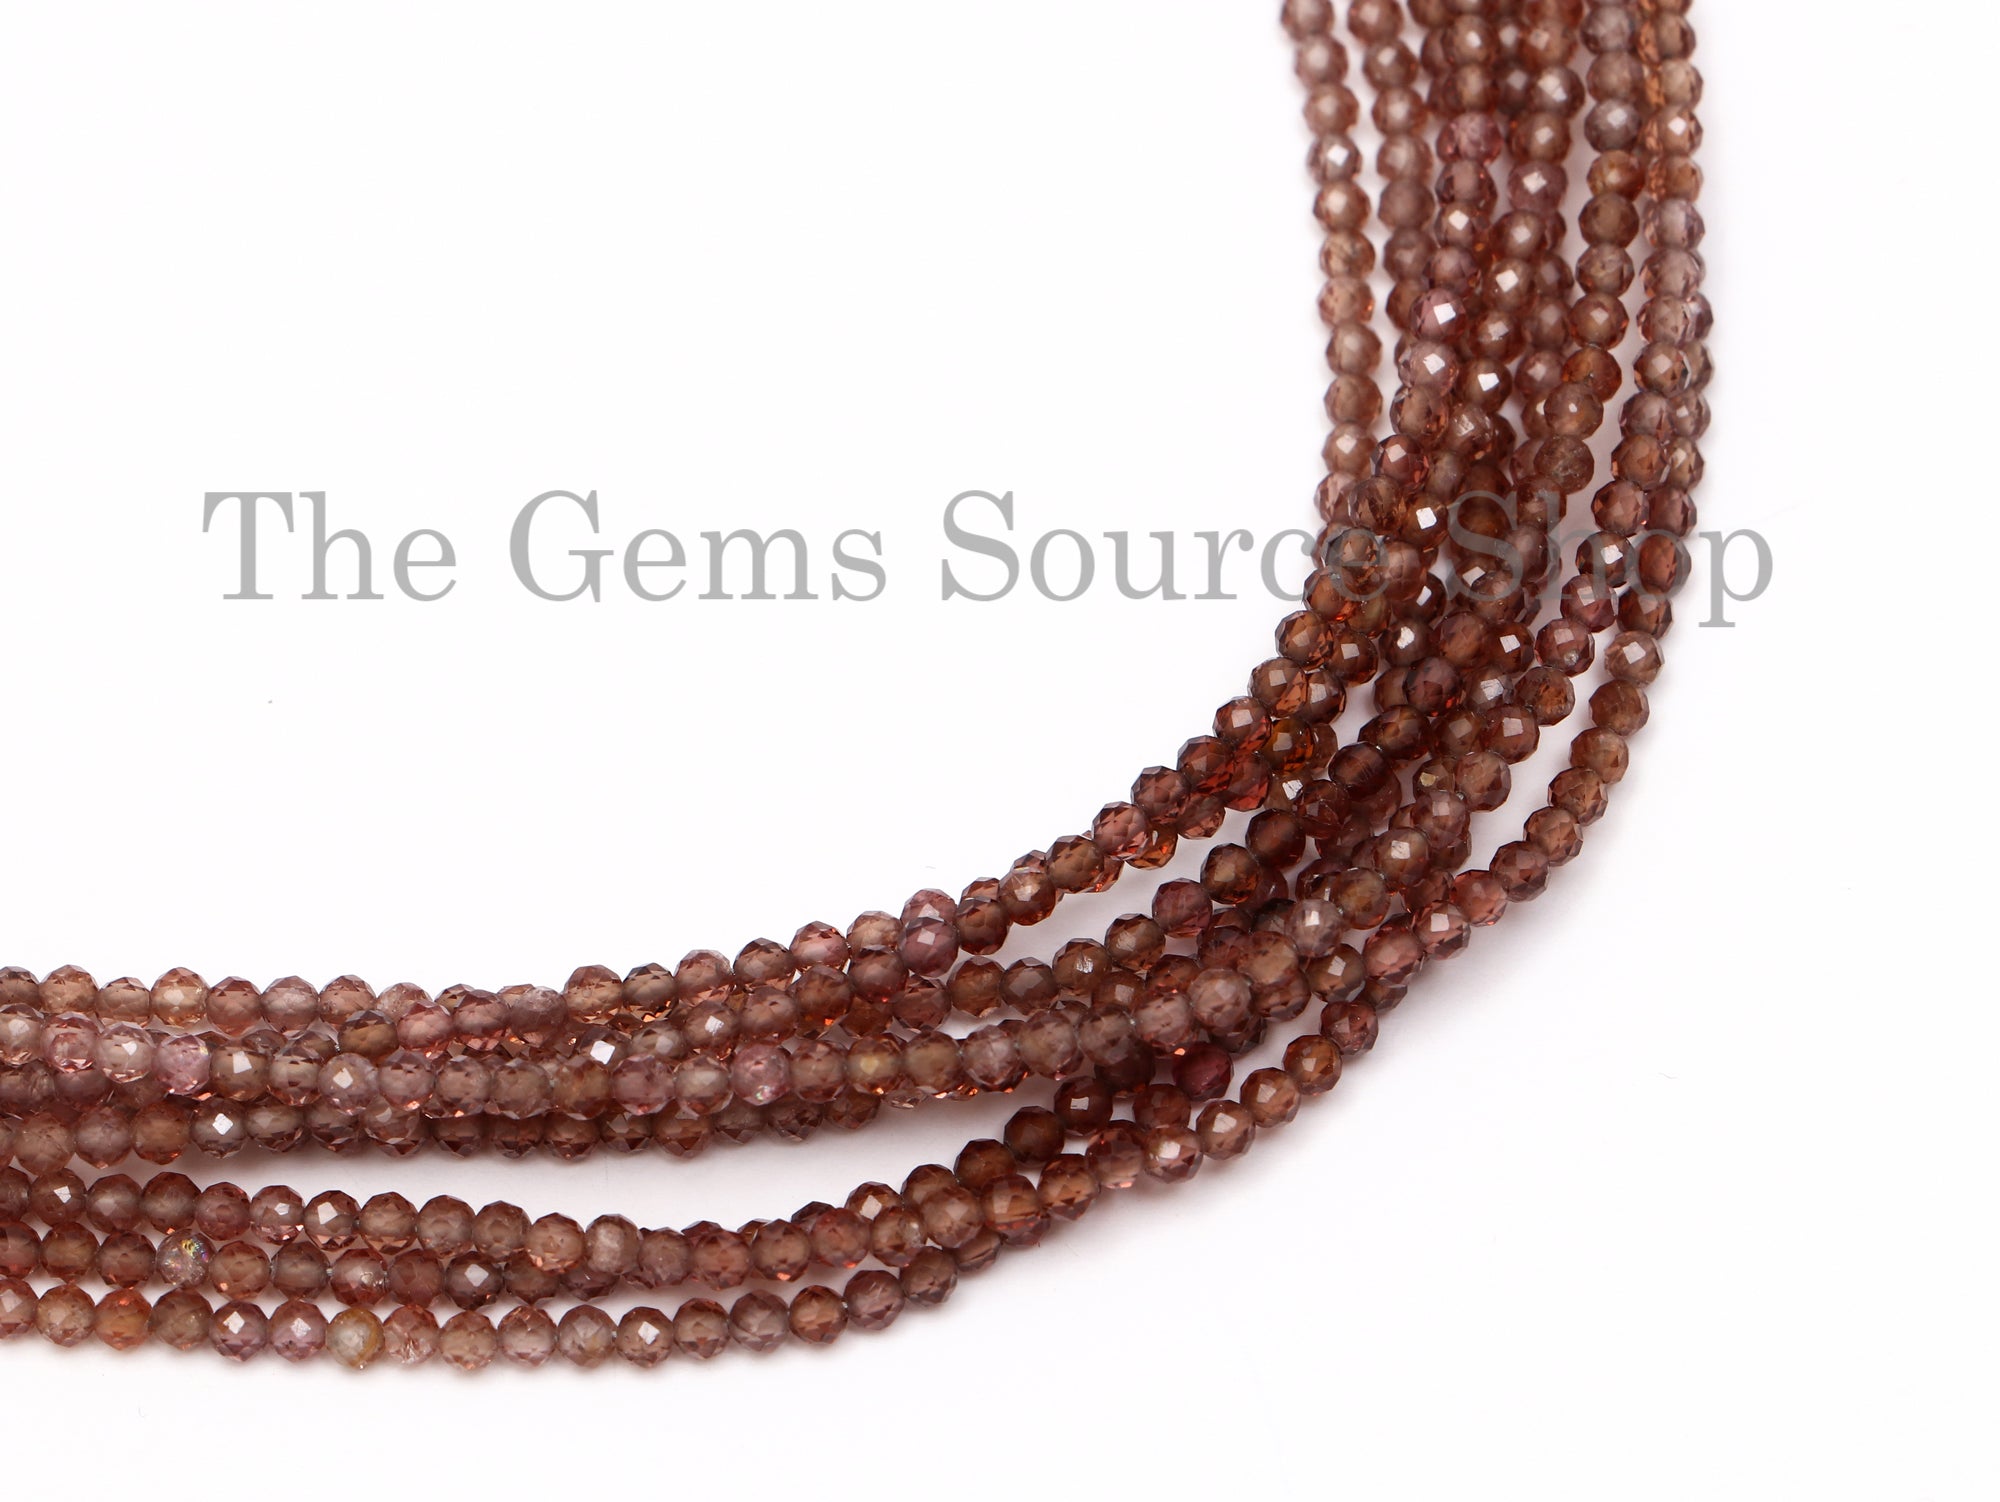 Shaded Light Brown Spinel Beads, Brown Spinel Faceted Beads, Brown Spinel Rondelle Beads, Brown Spinel Gemstone Beads